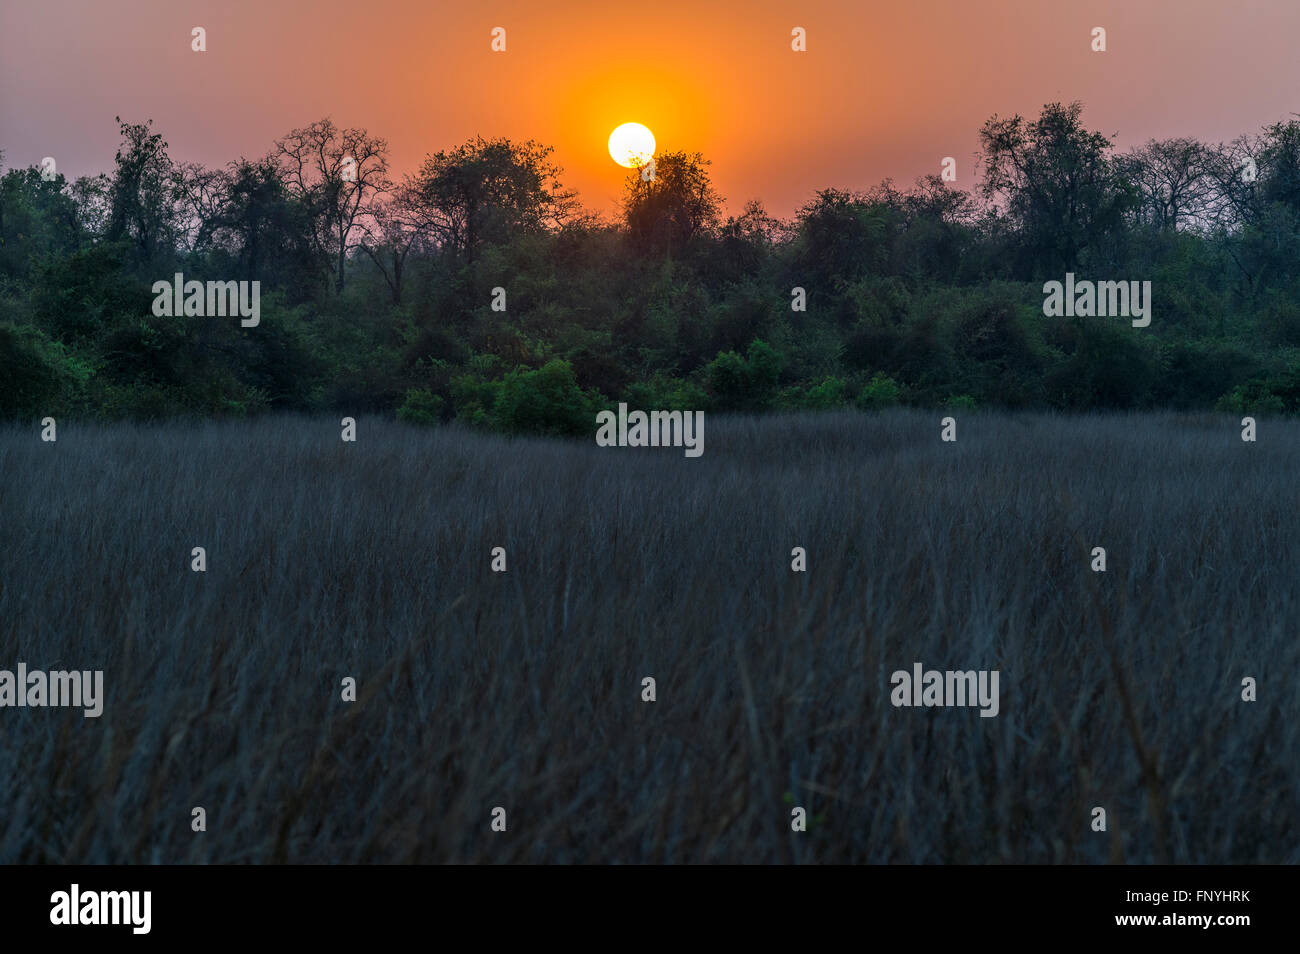 Sunset scenic view at Tadoba forest, India. Stock Photo